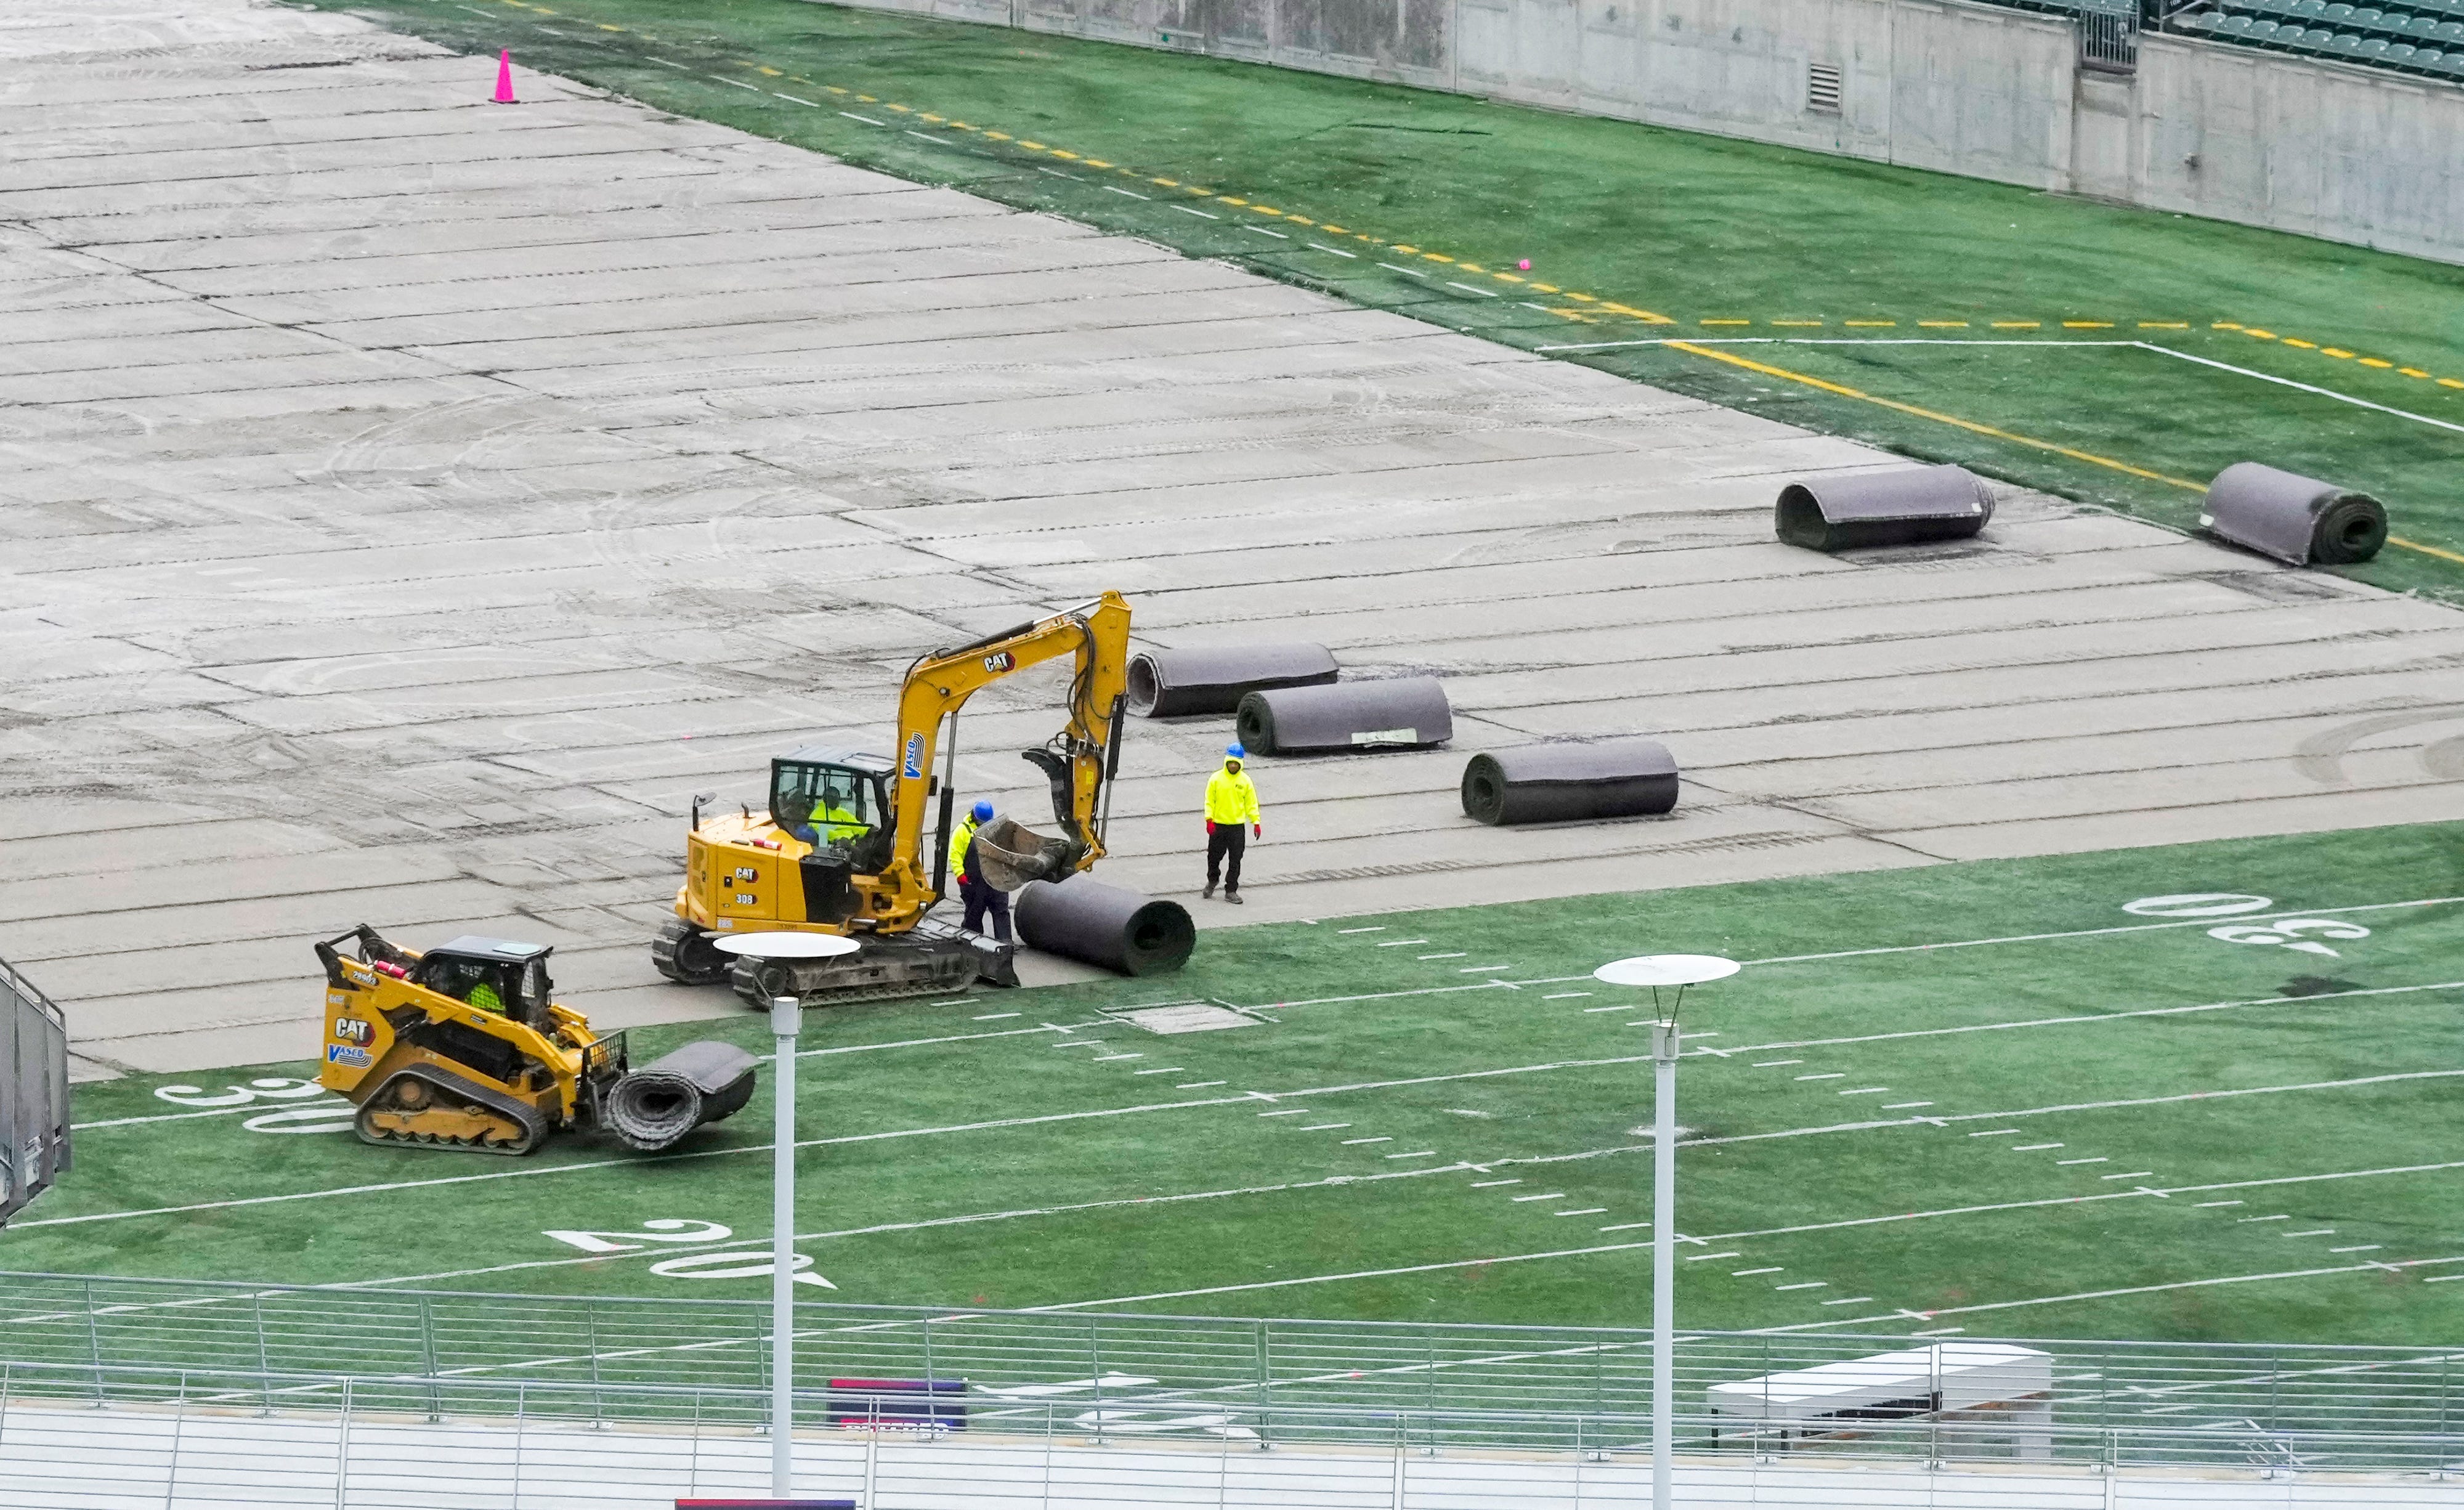 bengals begin construction on new turf playing surface